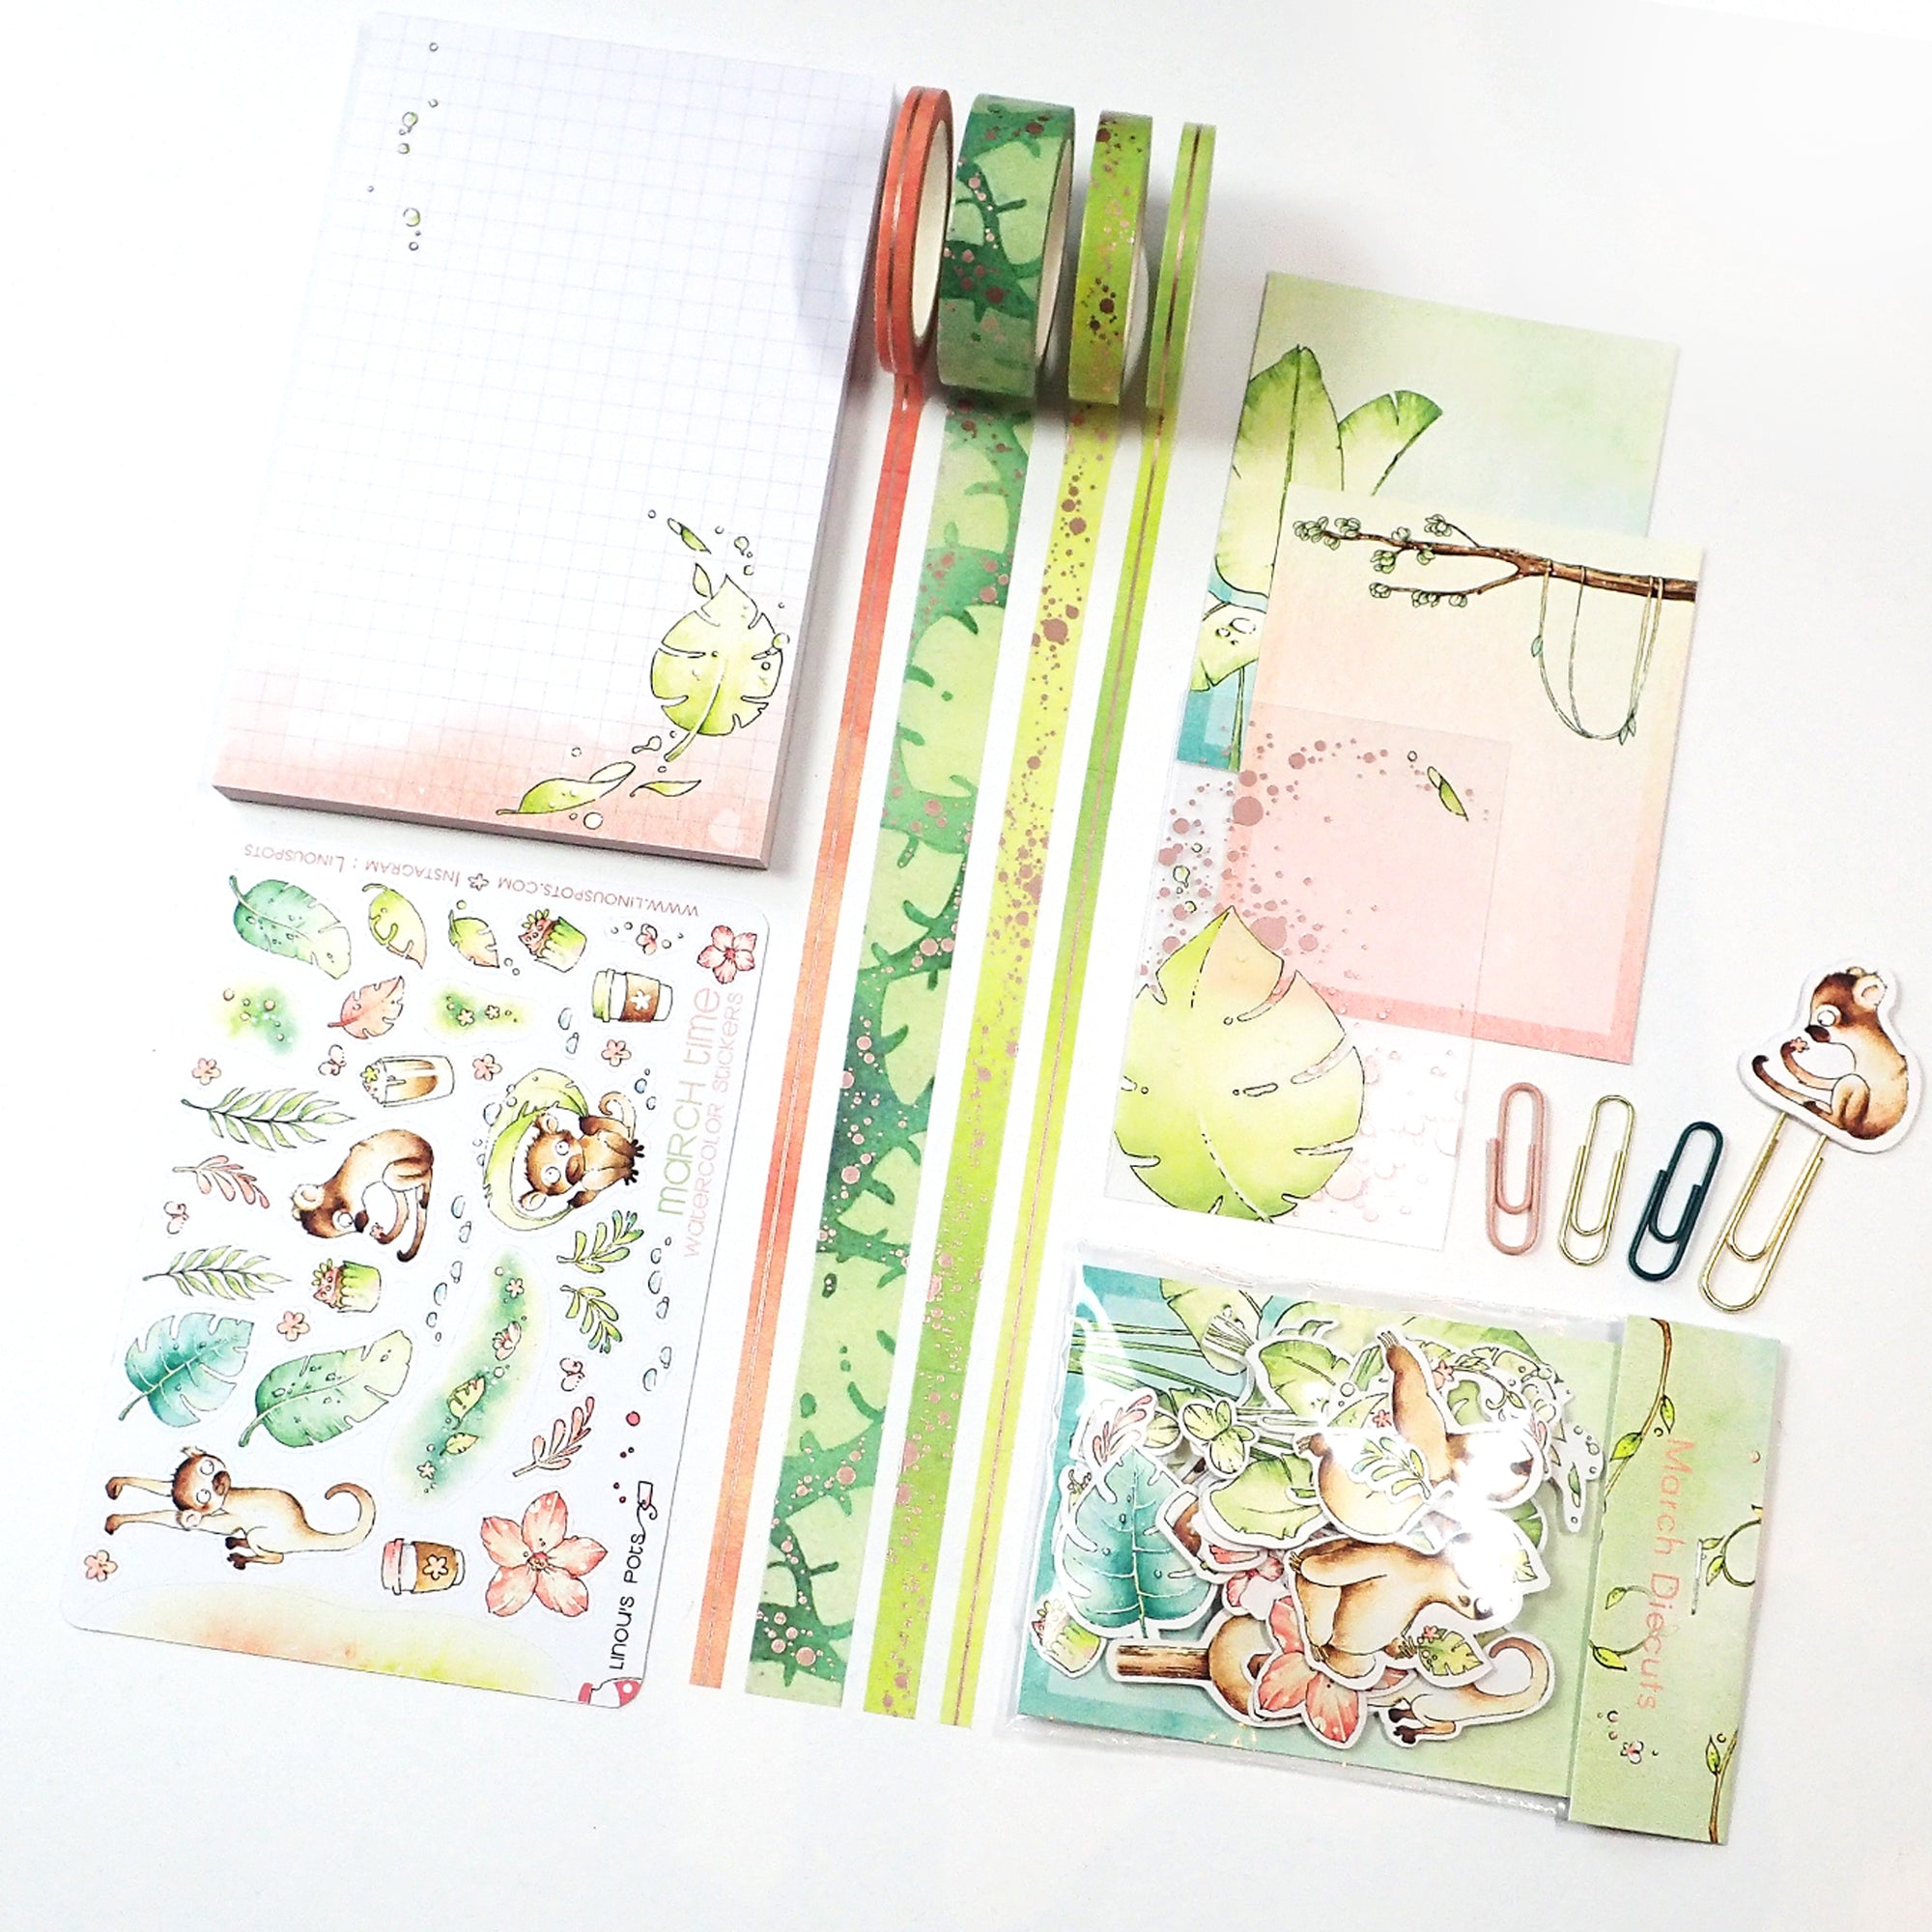 Planner supplies with Spring illustrations